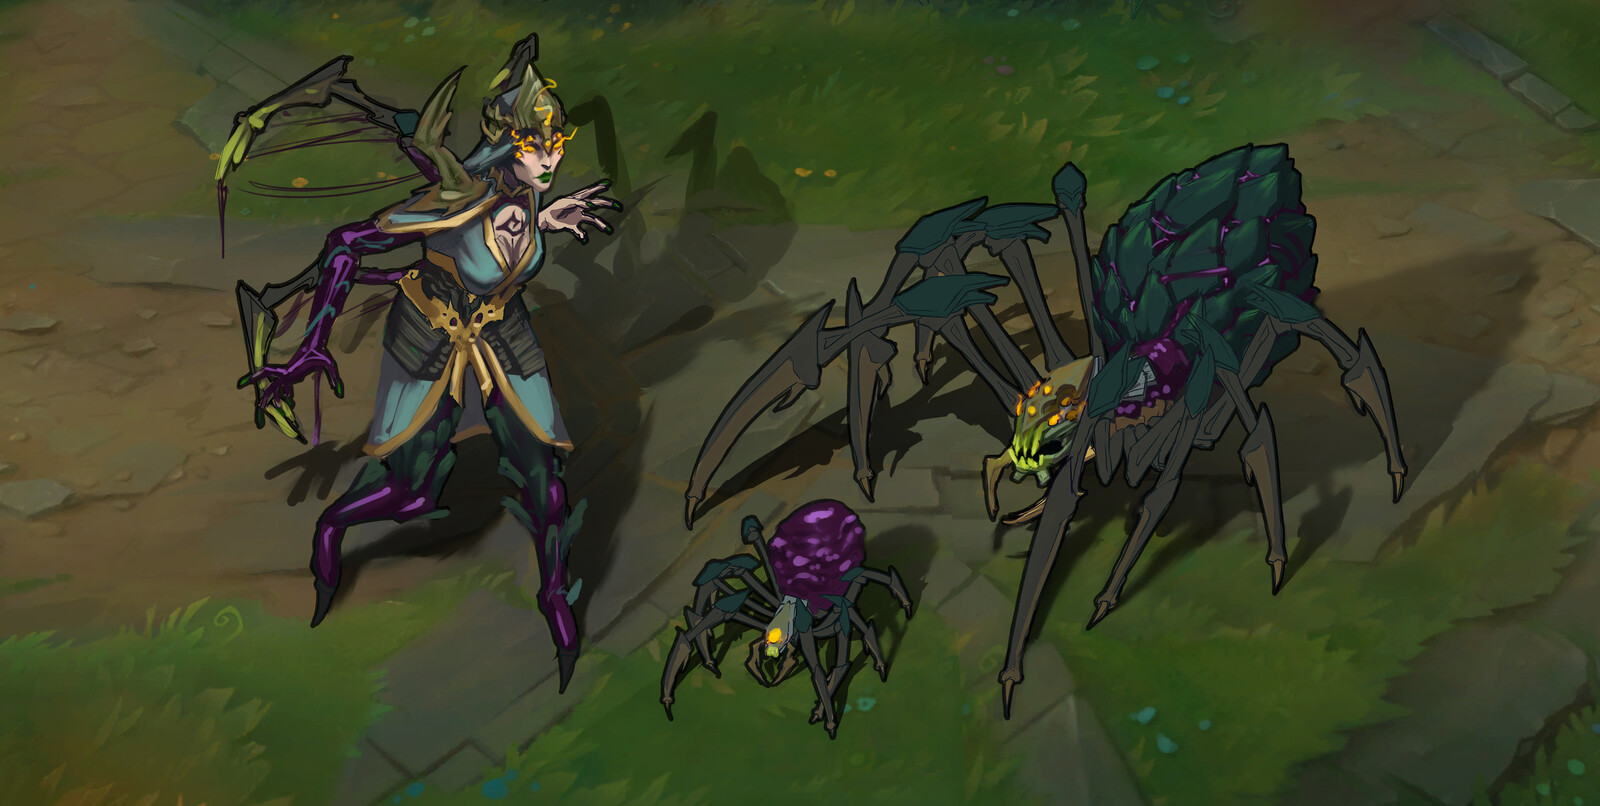 Ingame Mock-up, painted over a screenshot of Elise